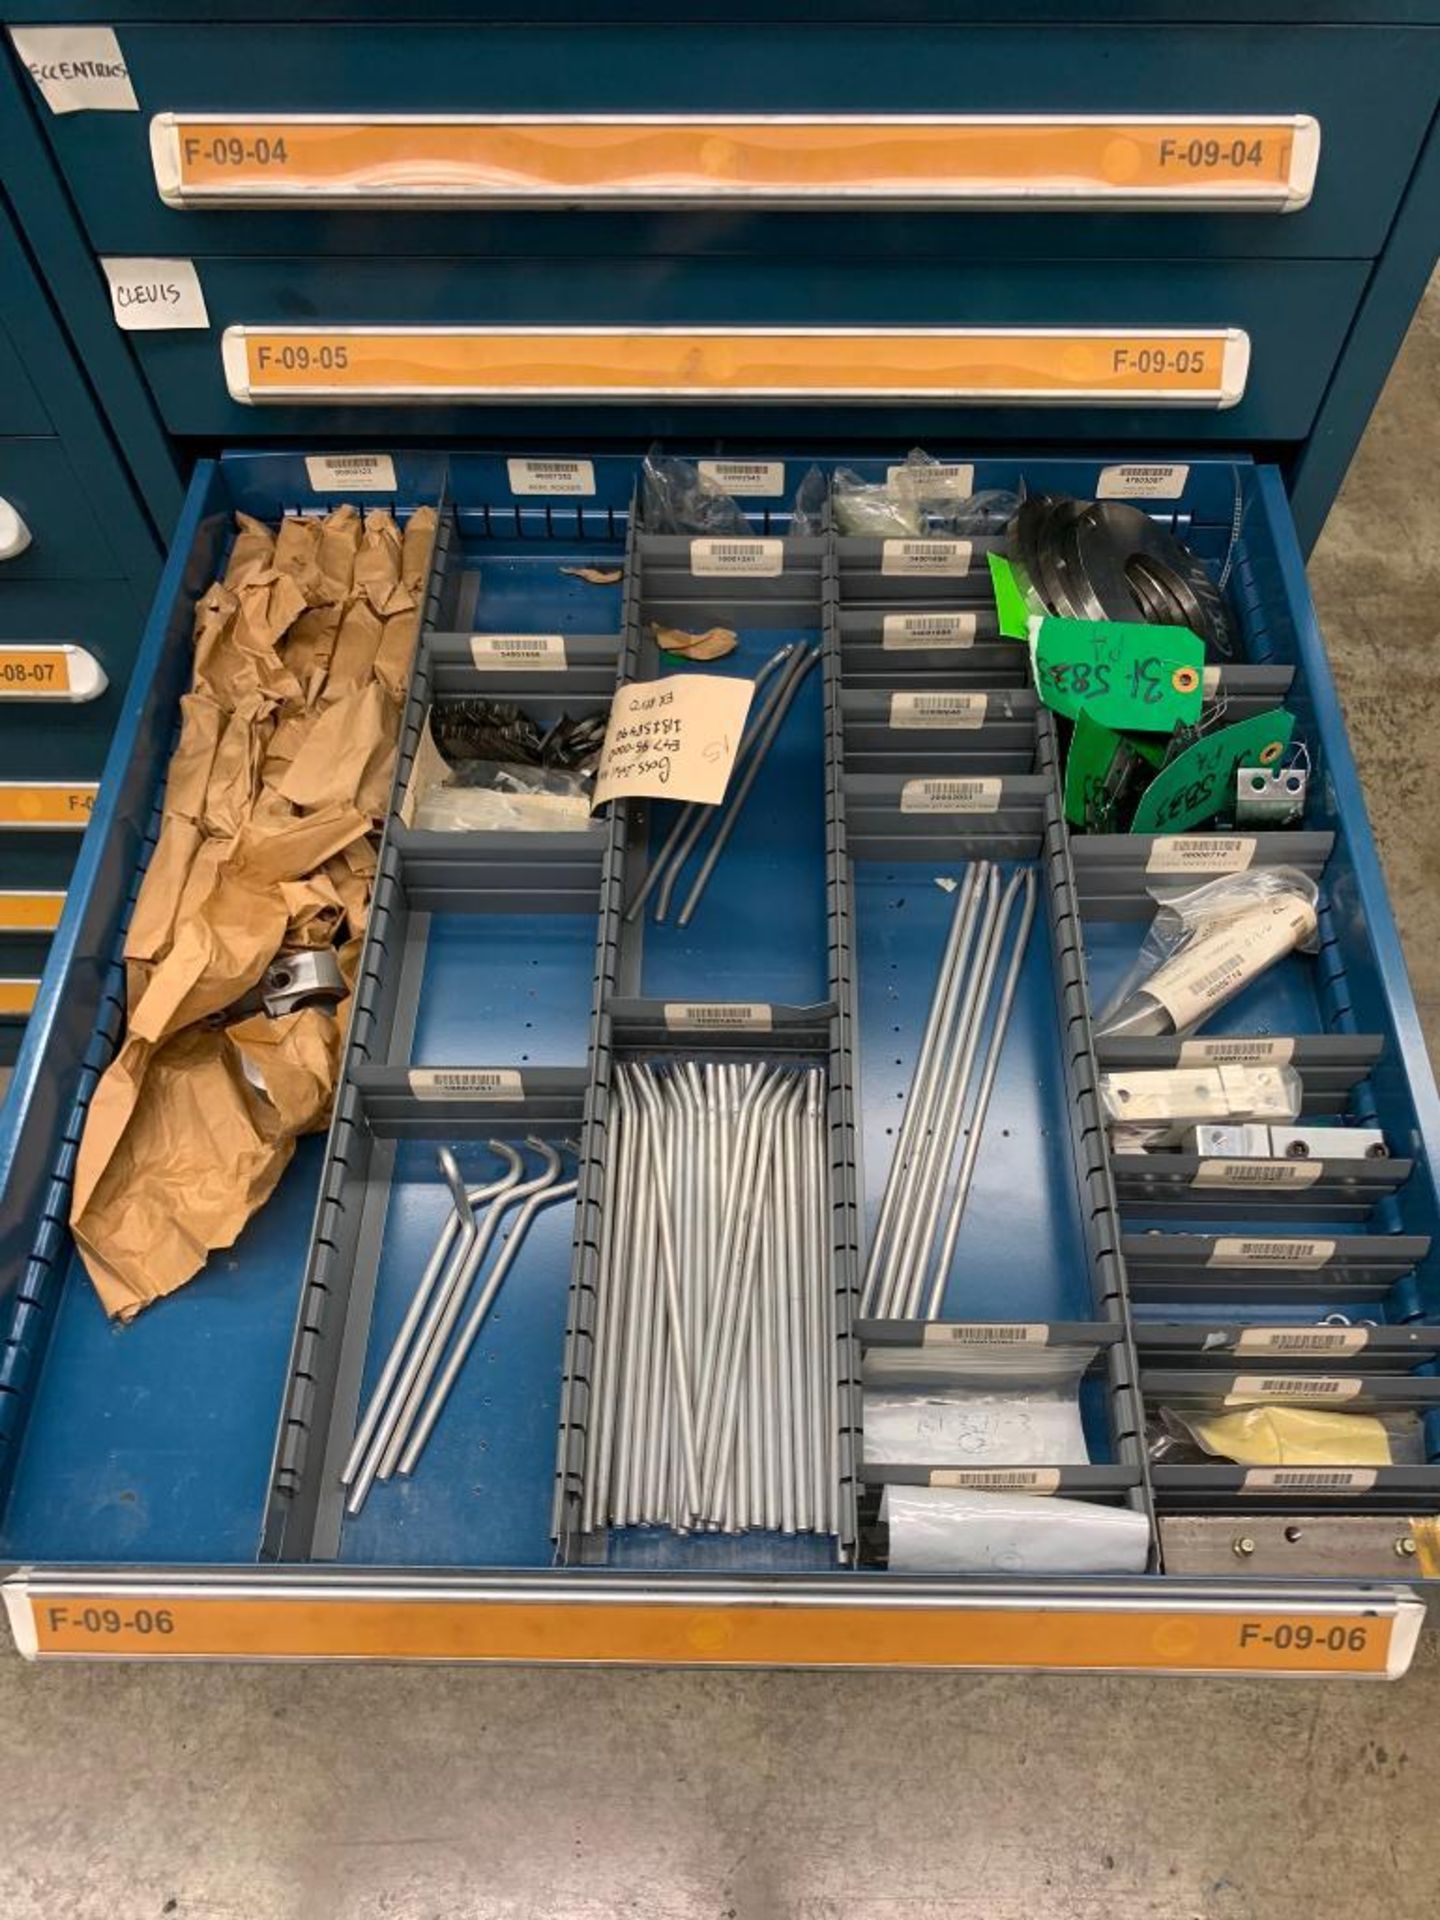 Vidmar 10-Drawer Cabinet w/ Assorted Levers, Plates, Blocks, Clevises, Wipers, Knife Blades - Image 8 of 12